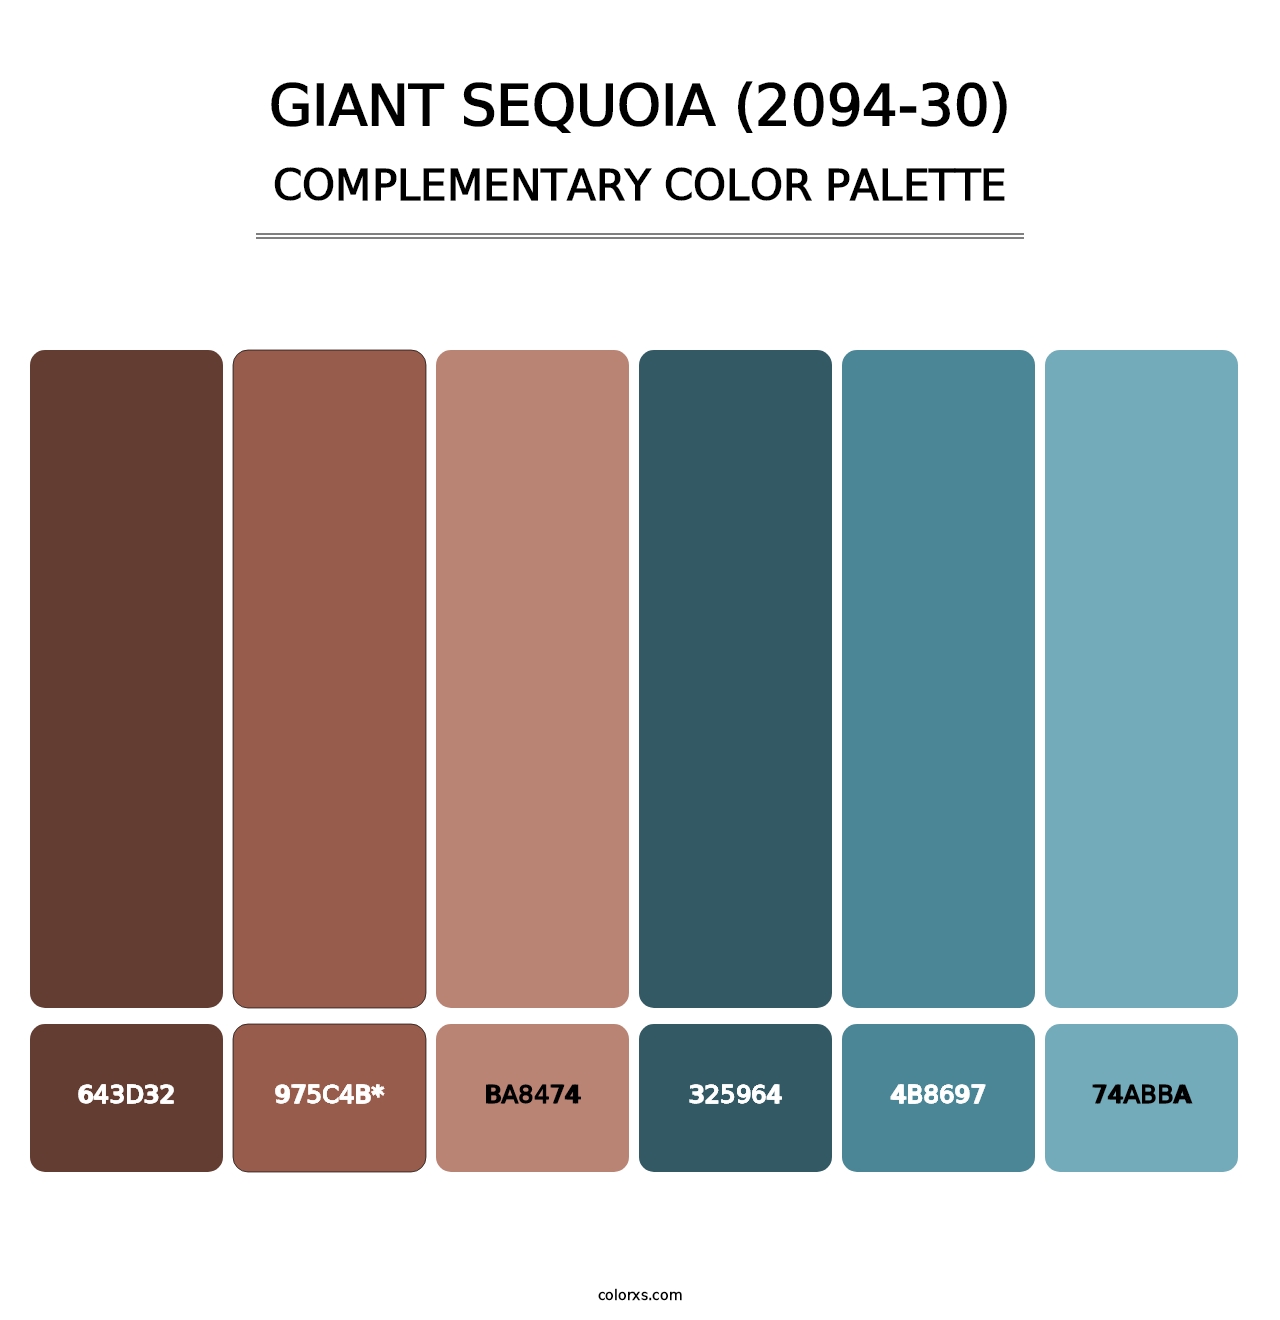 Giant Sequoia (2094-30) - Complementary Color Palette